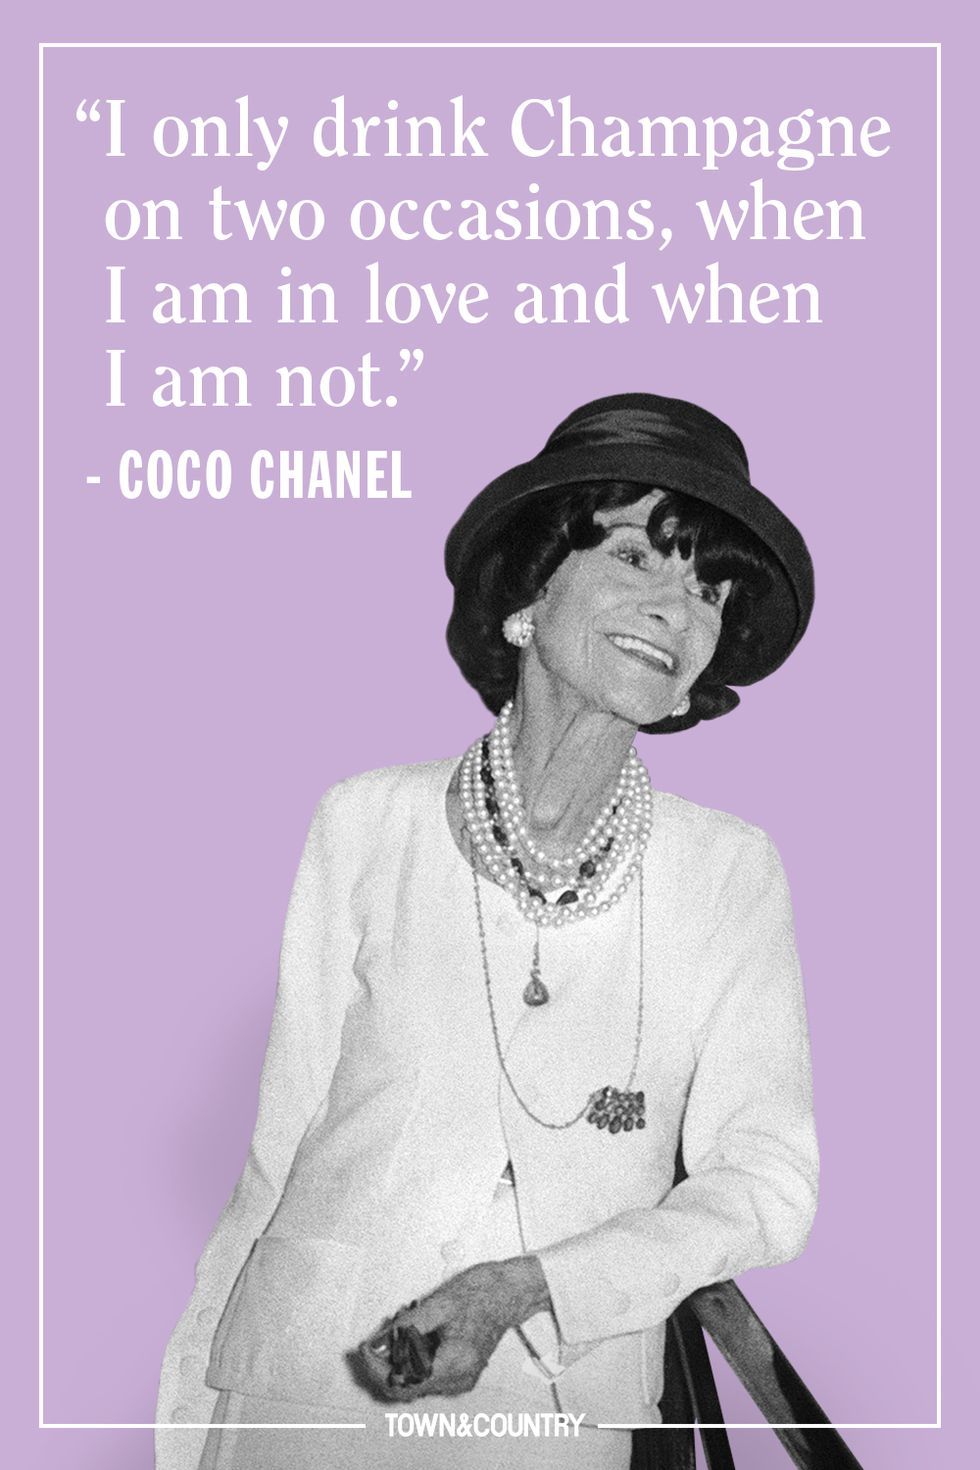 Amazoncom Elegance is  Coco Chanel Quote Wall Art  11x14 UNFRAMED  Black White Green Art Print  Contemporary Positive Inspirational Famous  Quotes Botanical Home Decor  Handmade Products